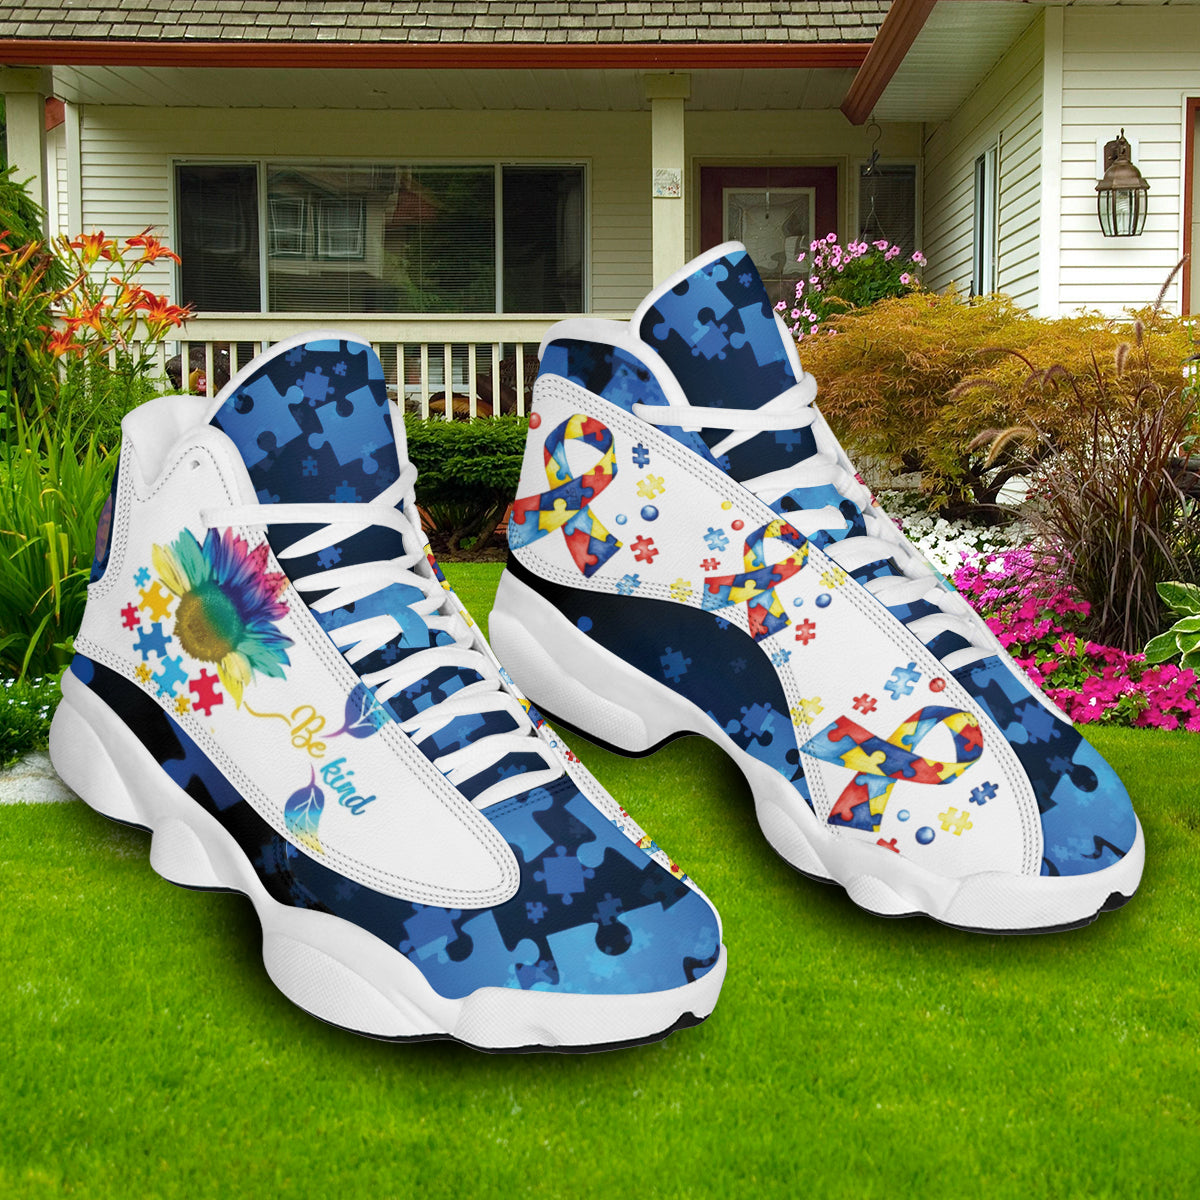 Autism Awareness Be Kind Puzzle Basketball Shoes For Men Women - Christian Shoes - Jesus Shoes - Unisex Basketball Shoes